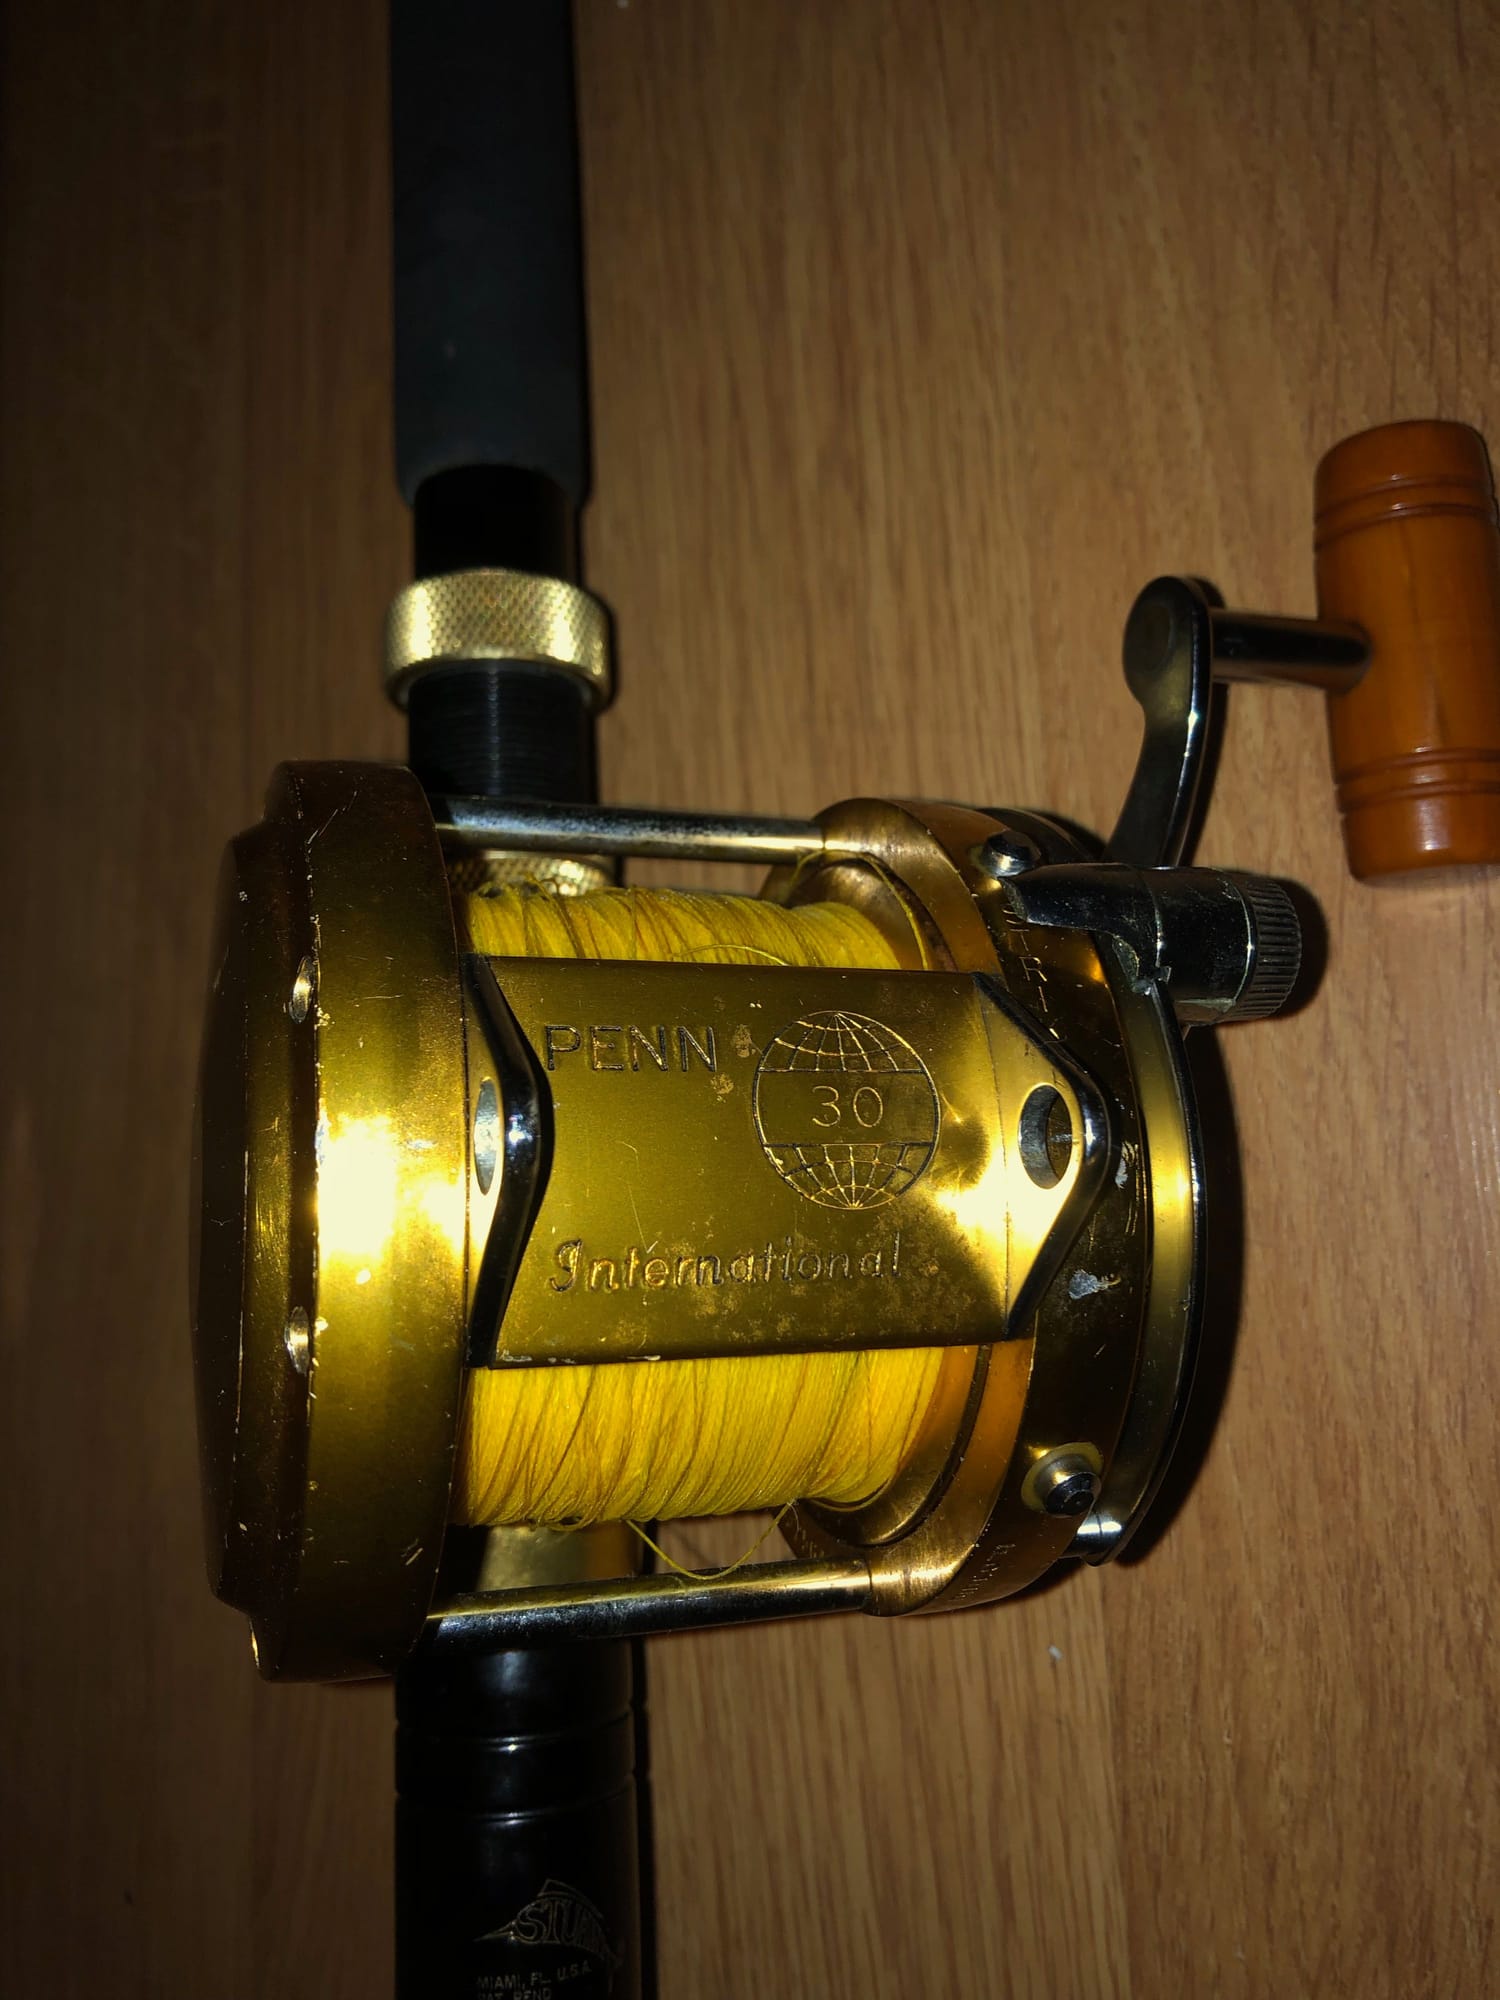 6x Shimano tld 20's on Penn international rods - The Hull Truth - Boating  and Fishing Forum